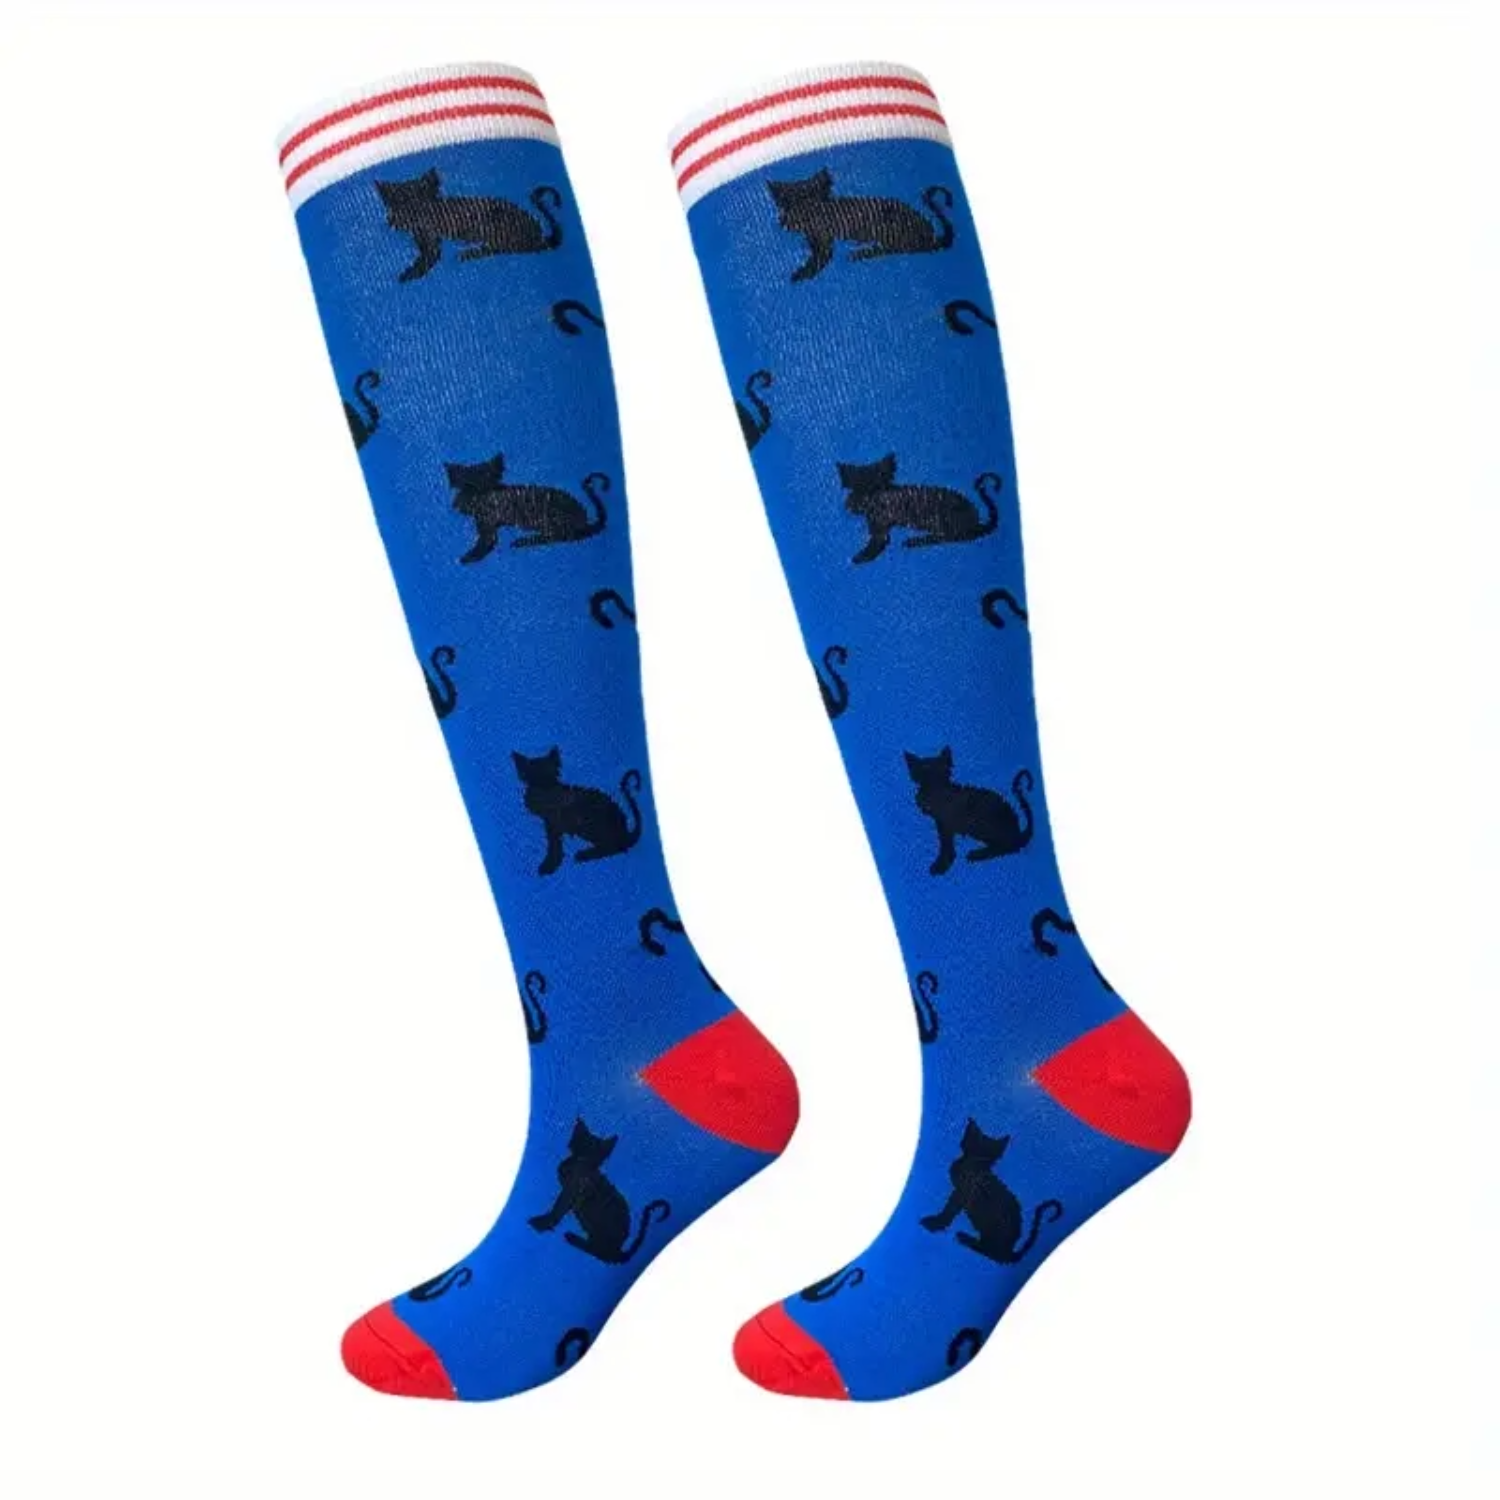 Cats Patterned Knee High (Compression Socks)